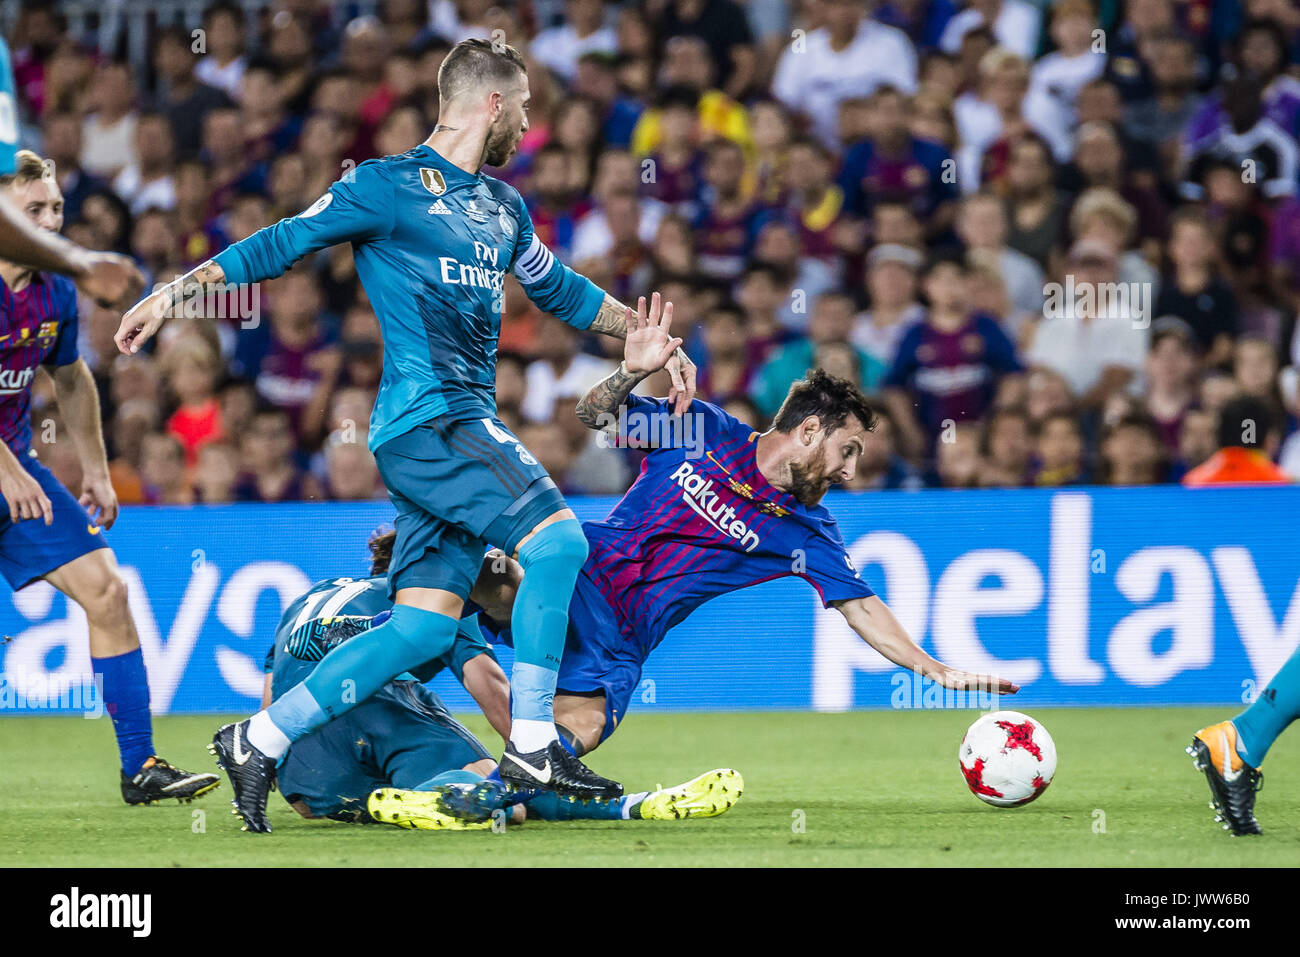 Barcelona, Catalonia, Spain. 13th Aug, 2017. FC Barcelona forward MESSI in action during the Spanish Super Cup Final 1st leg between FC Barcelona and Real Madrid at the Camp Nou stadium in Barcelona Credit: Matthias Oesterle/ZUMA Wire/Alamy Live News Stock Photo